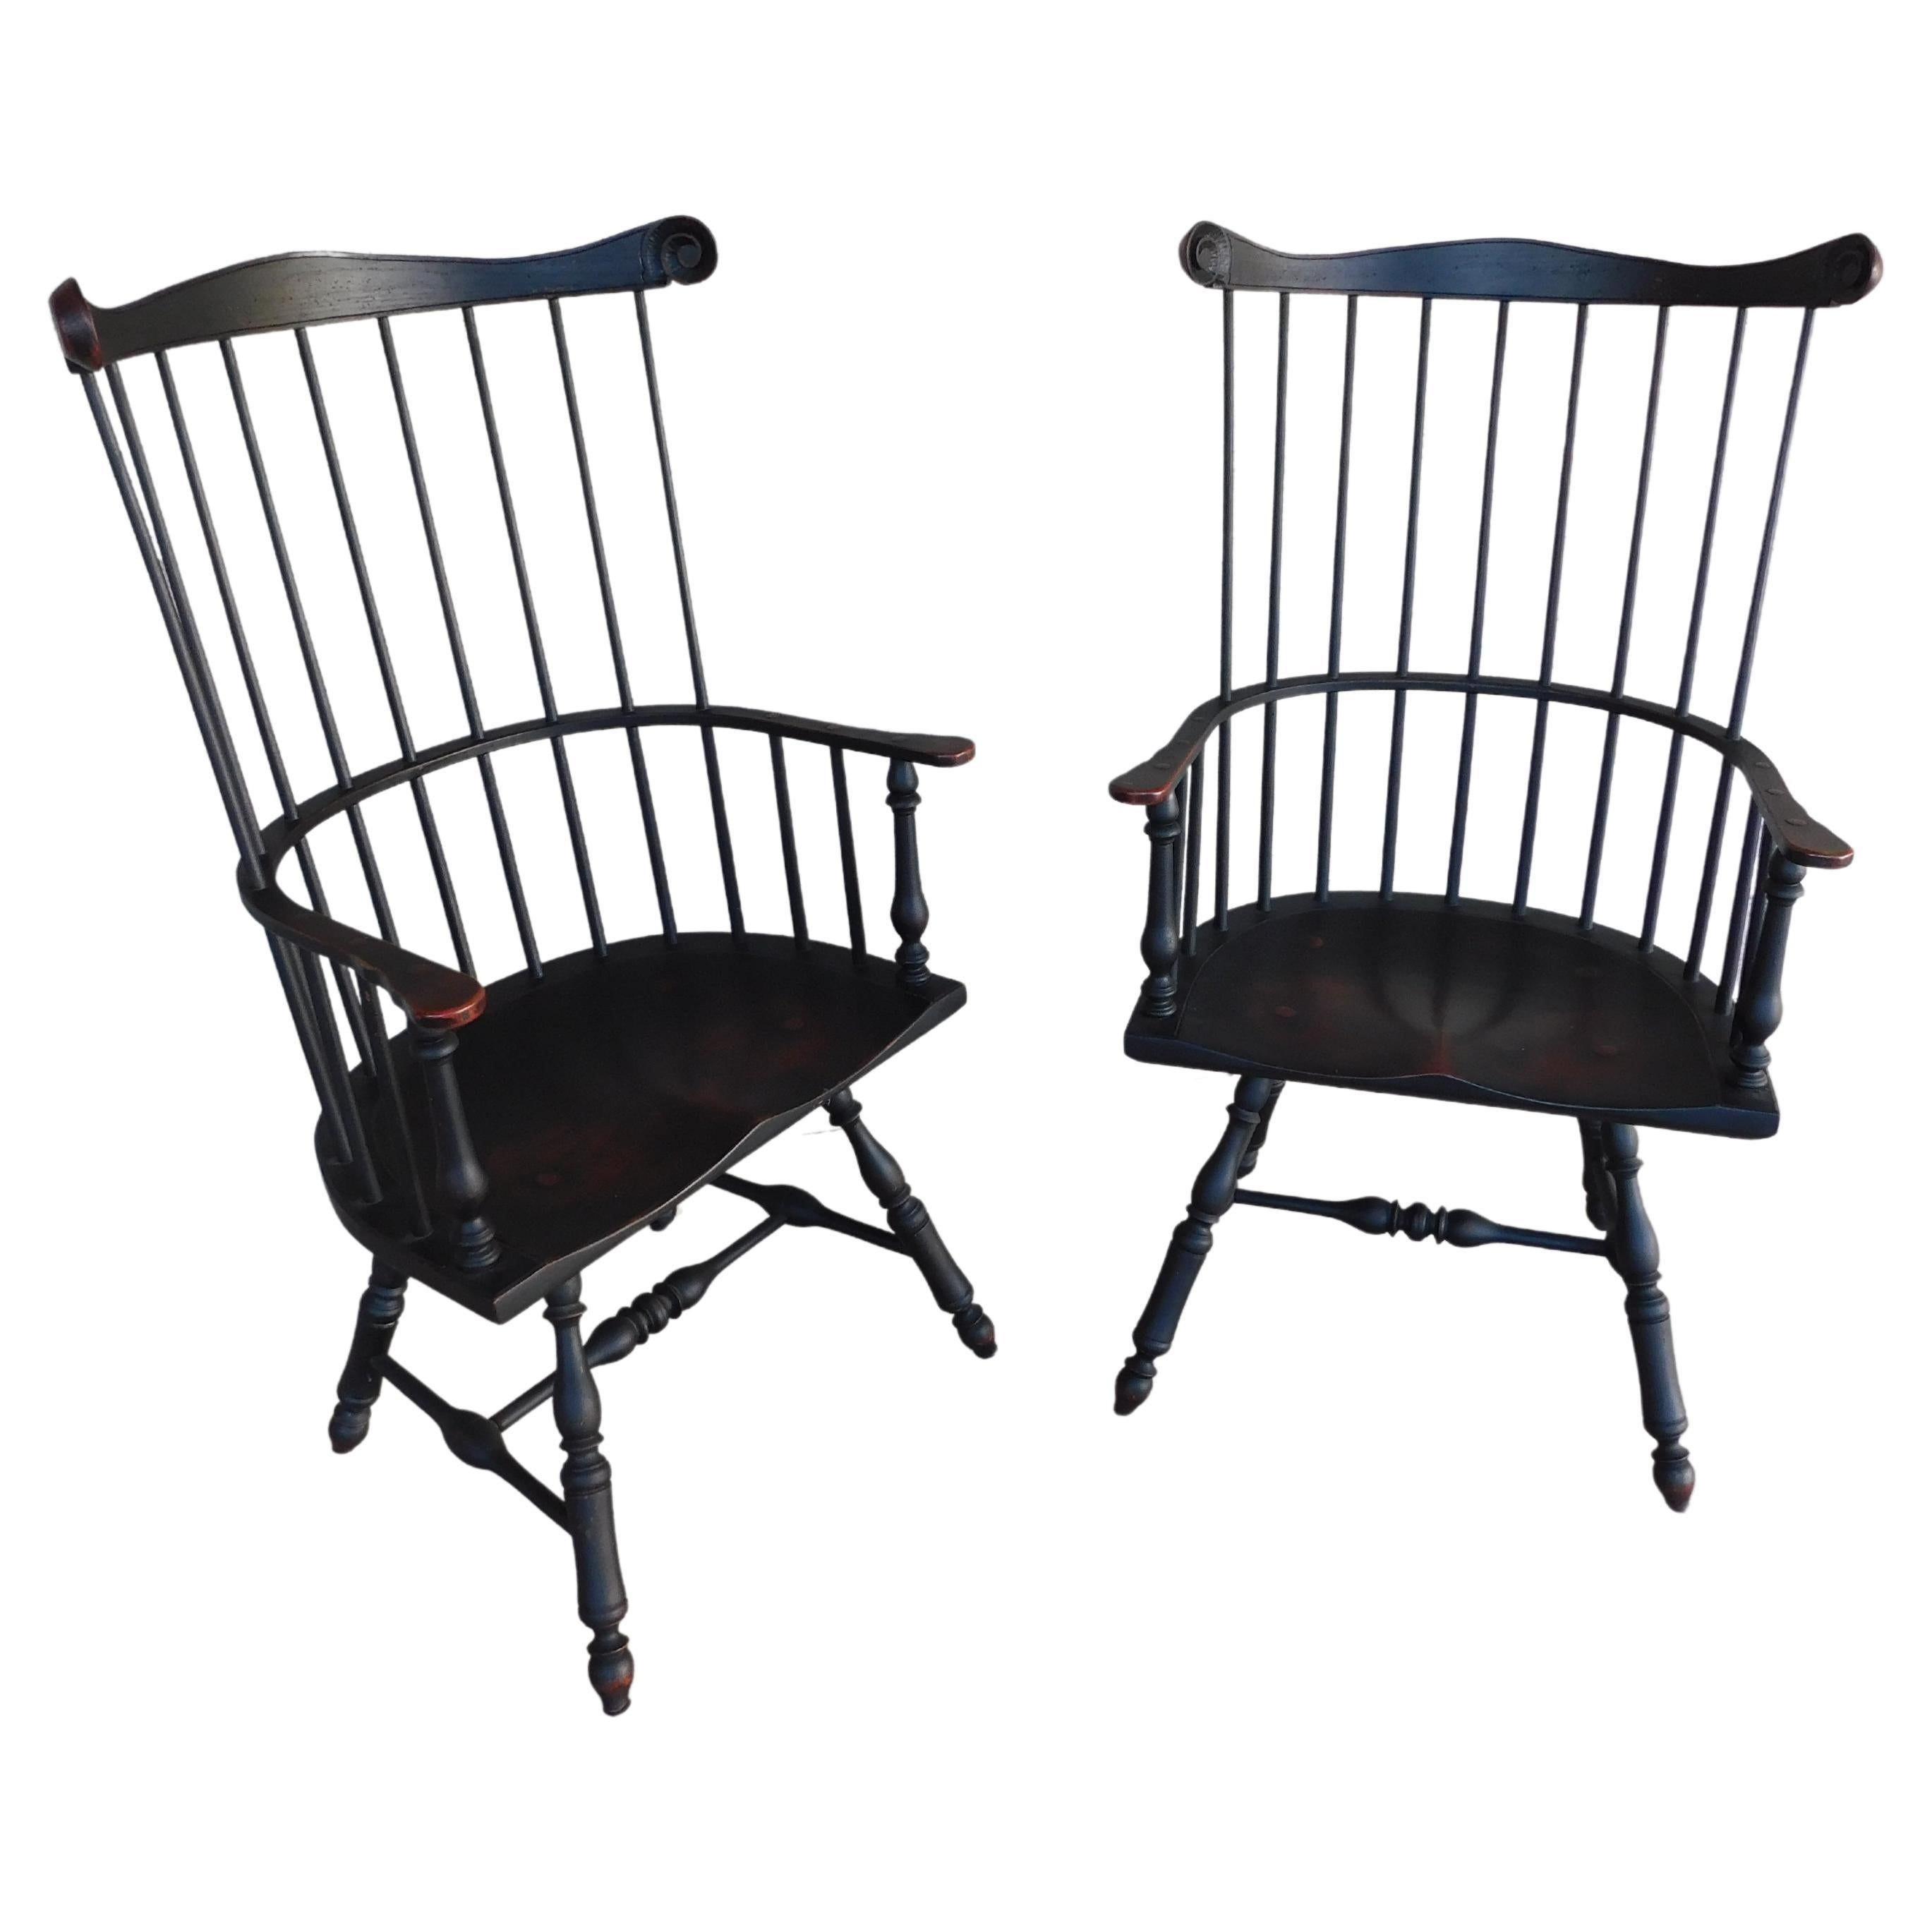 Custom Antiqued Distressed Finish Philadelphia Style Windsor Arm Chairs - a Pair